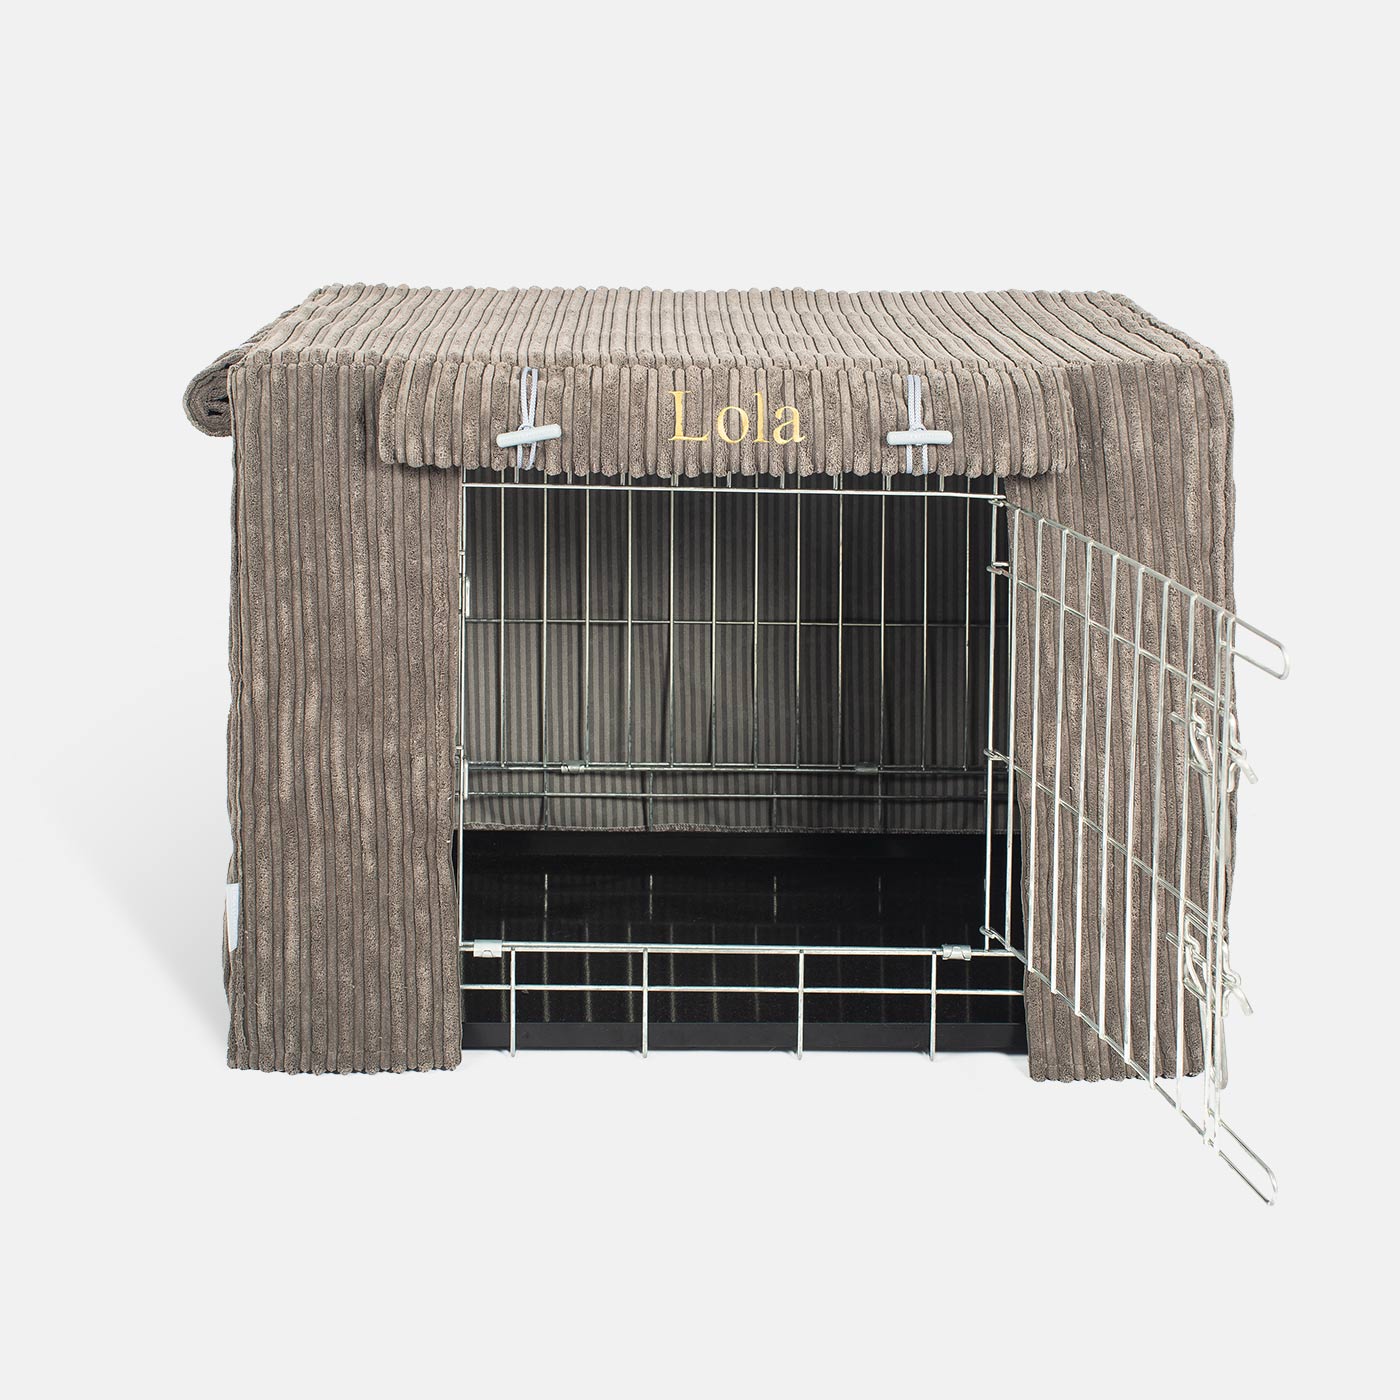 Luxury Dog Crate Cover, Essentials Plush Dark Grey Crate Cover!  The Perfect Dog Crate Accessory, Available To Personalise Now at Lords & Labradors